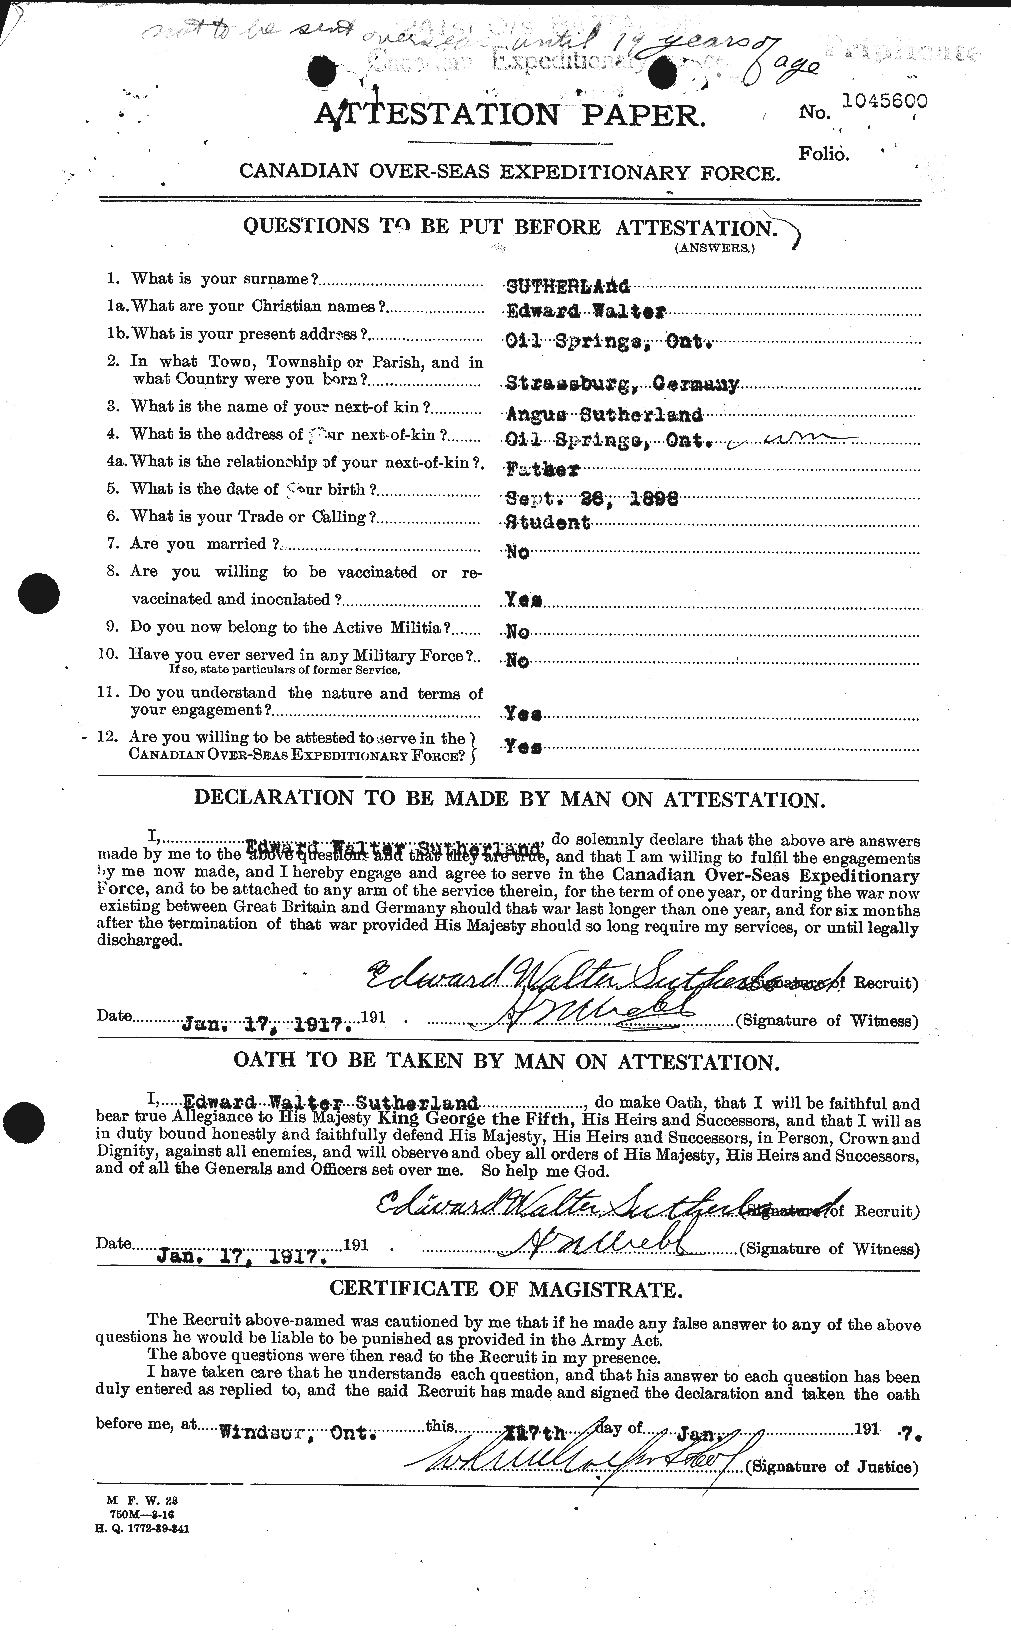 Personnel Records of the First World War - CEF 124900a